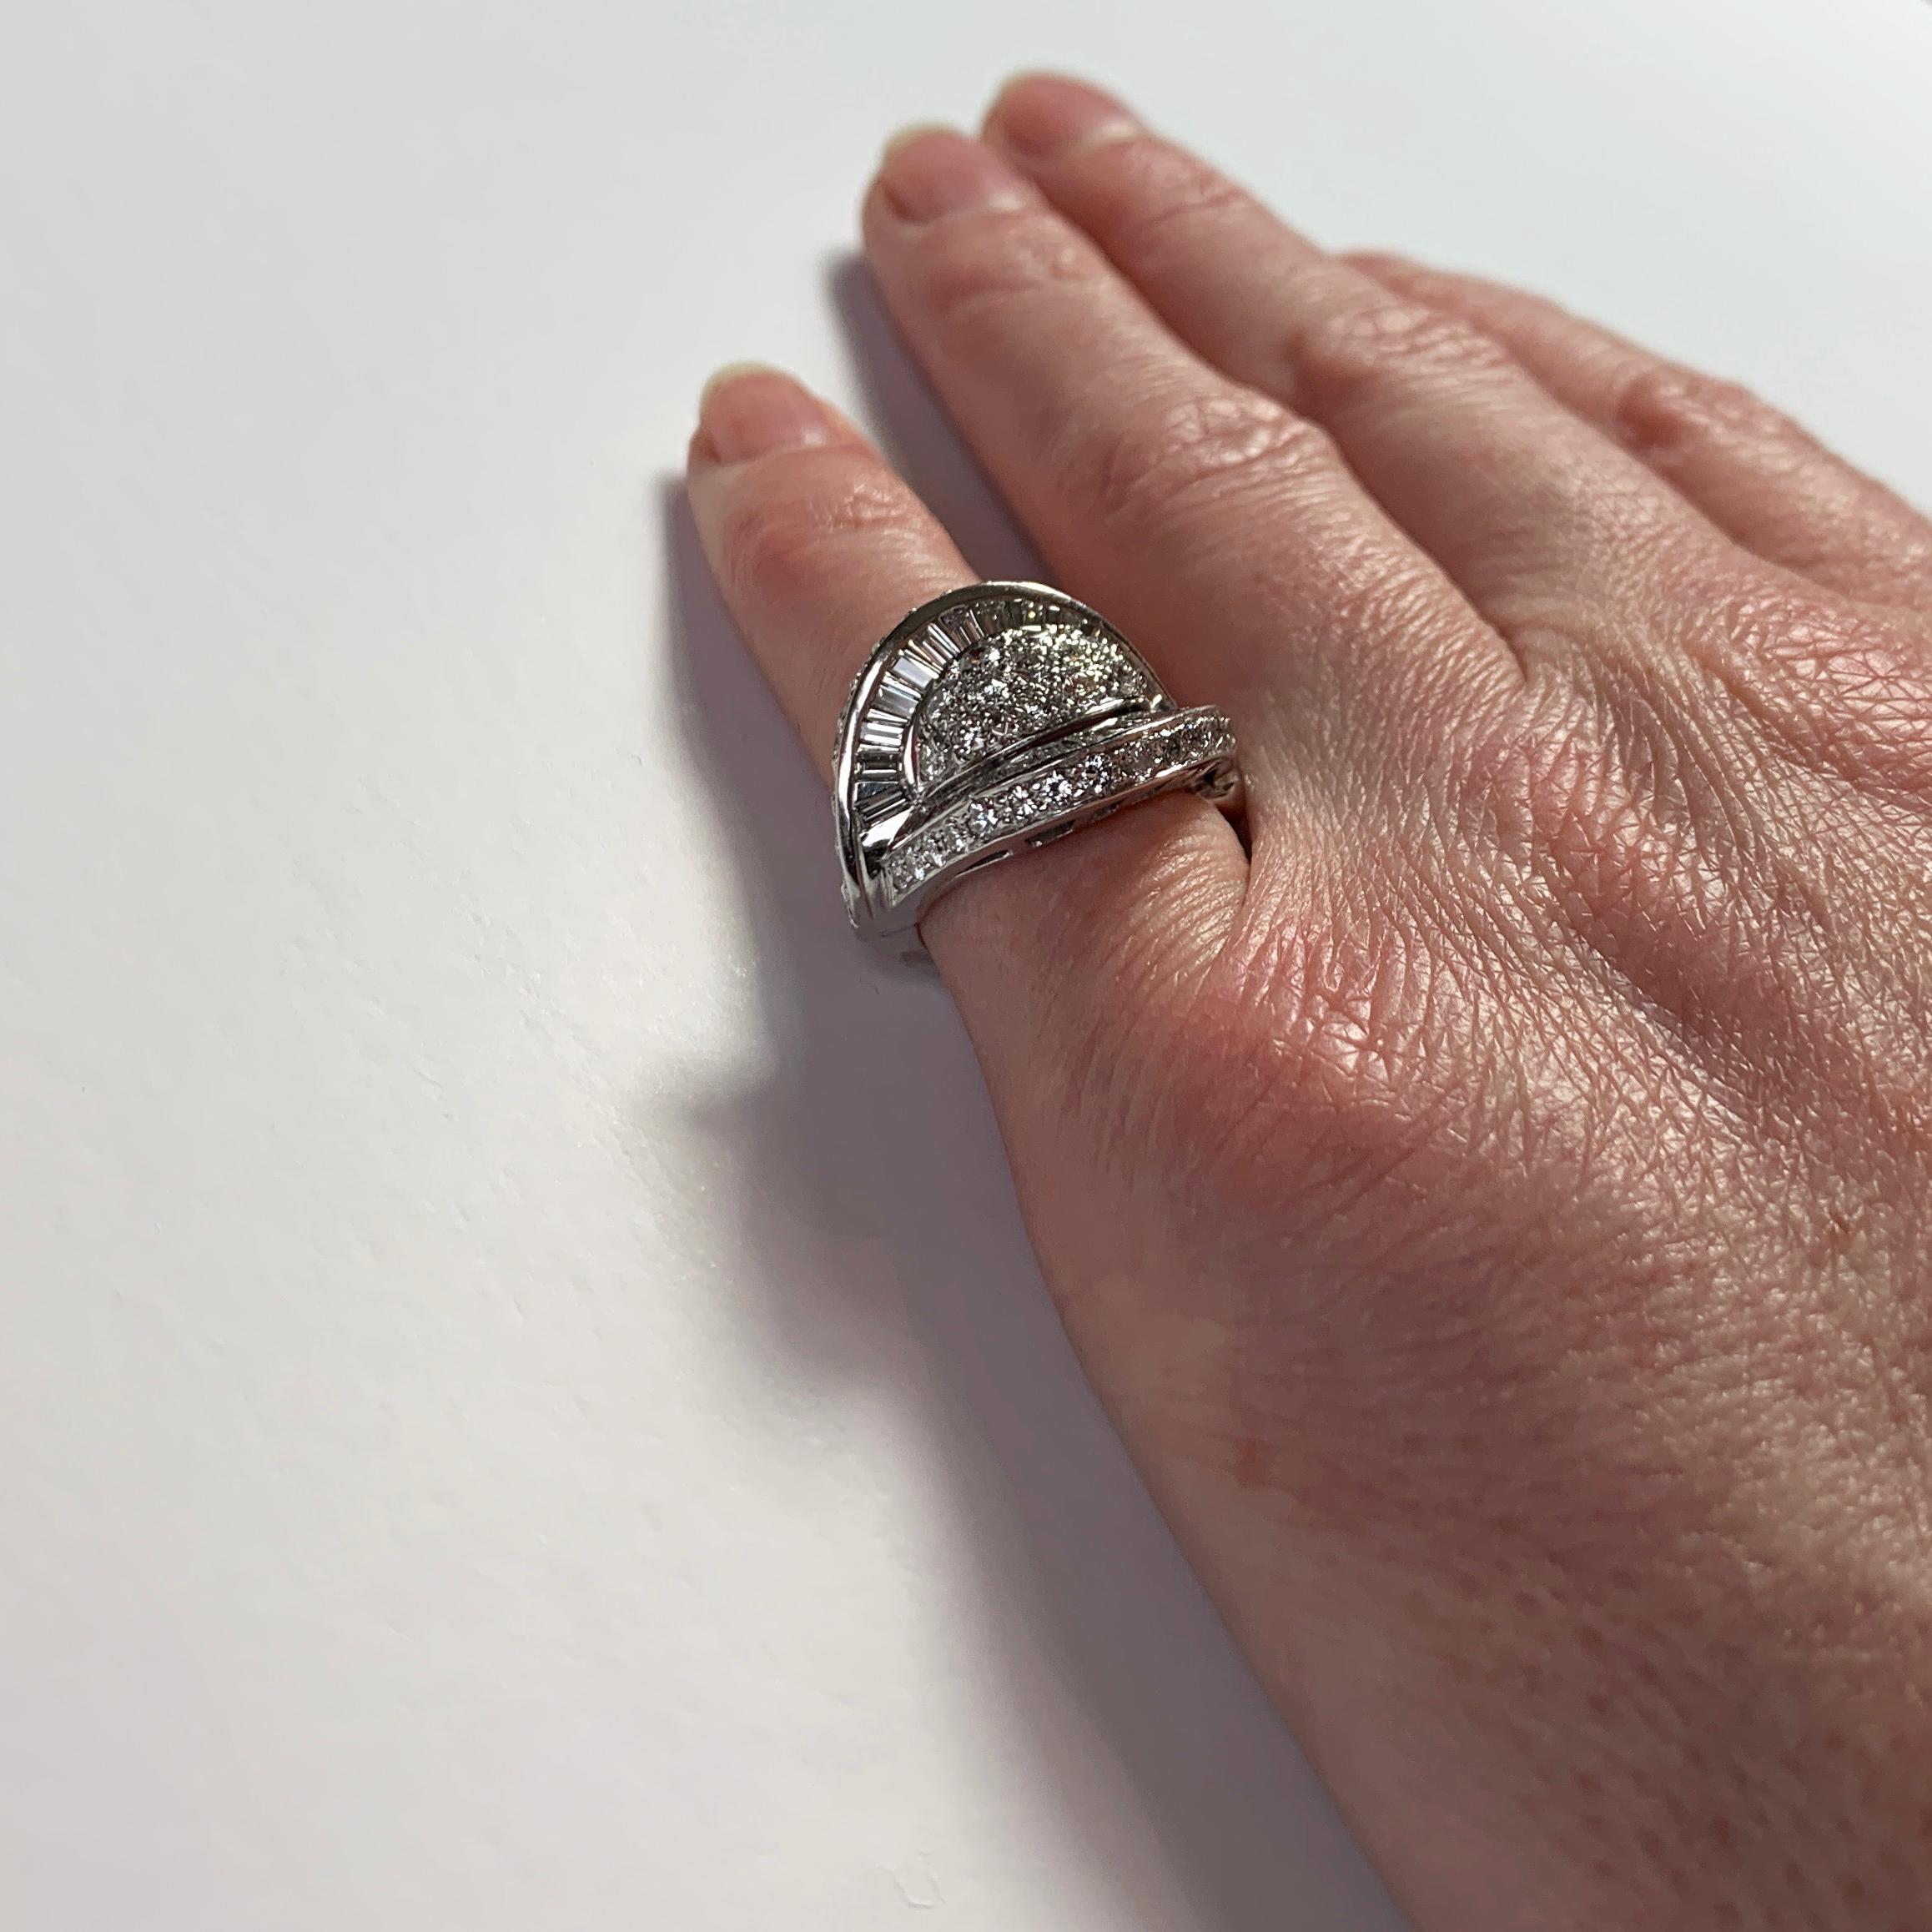 A platinum and white diamond cocktail ring designed as a dome with curved and flaring ridges to each side, set with 47 round brilliant cut white diamonds and 26 tapered baguette diamonds. Unmarked but tested for platinum.

Ring size: 3.5 (US), G